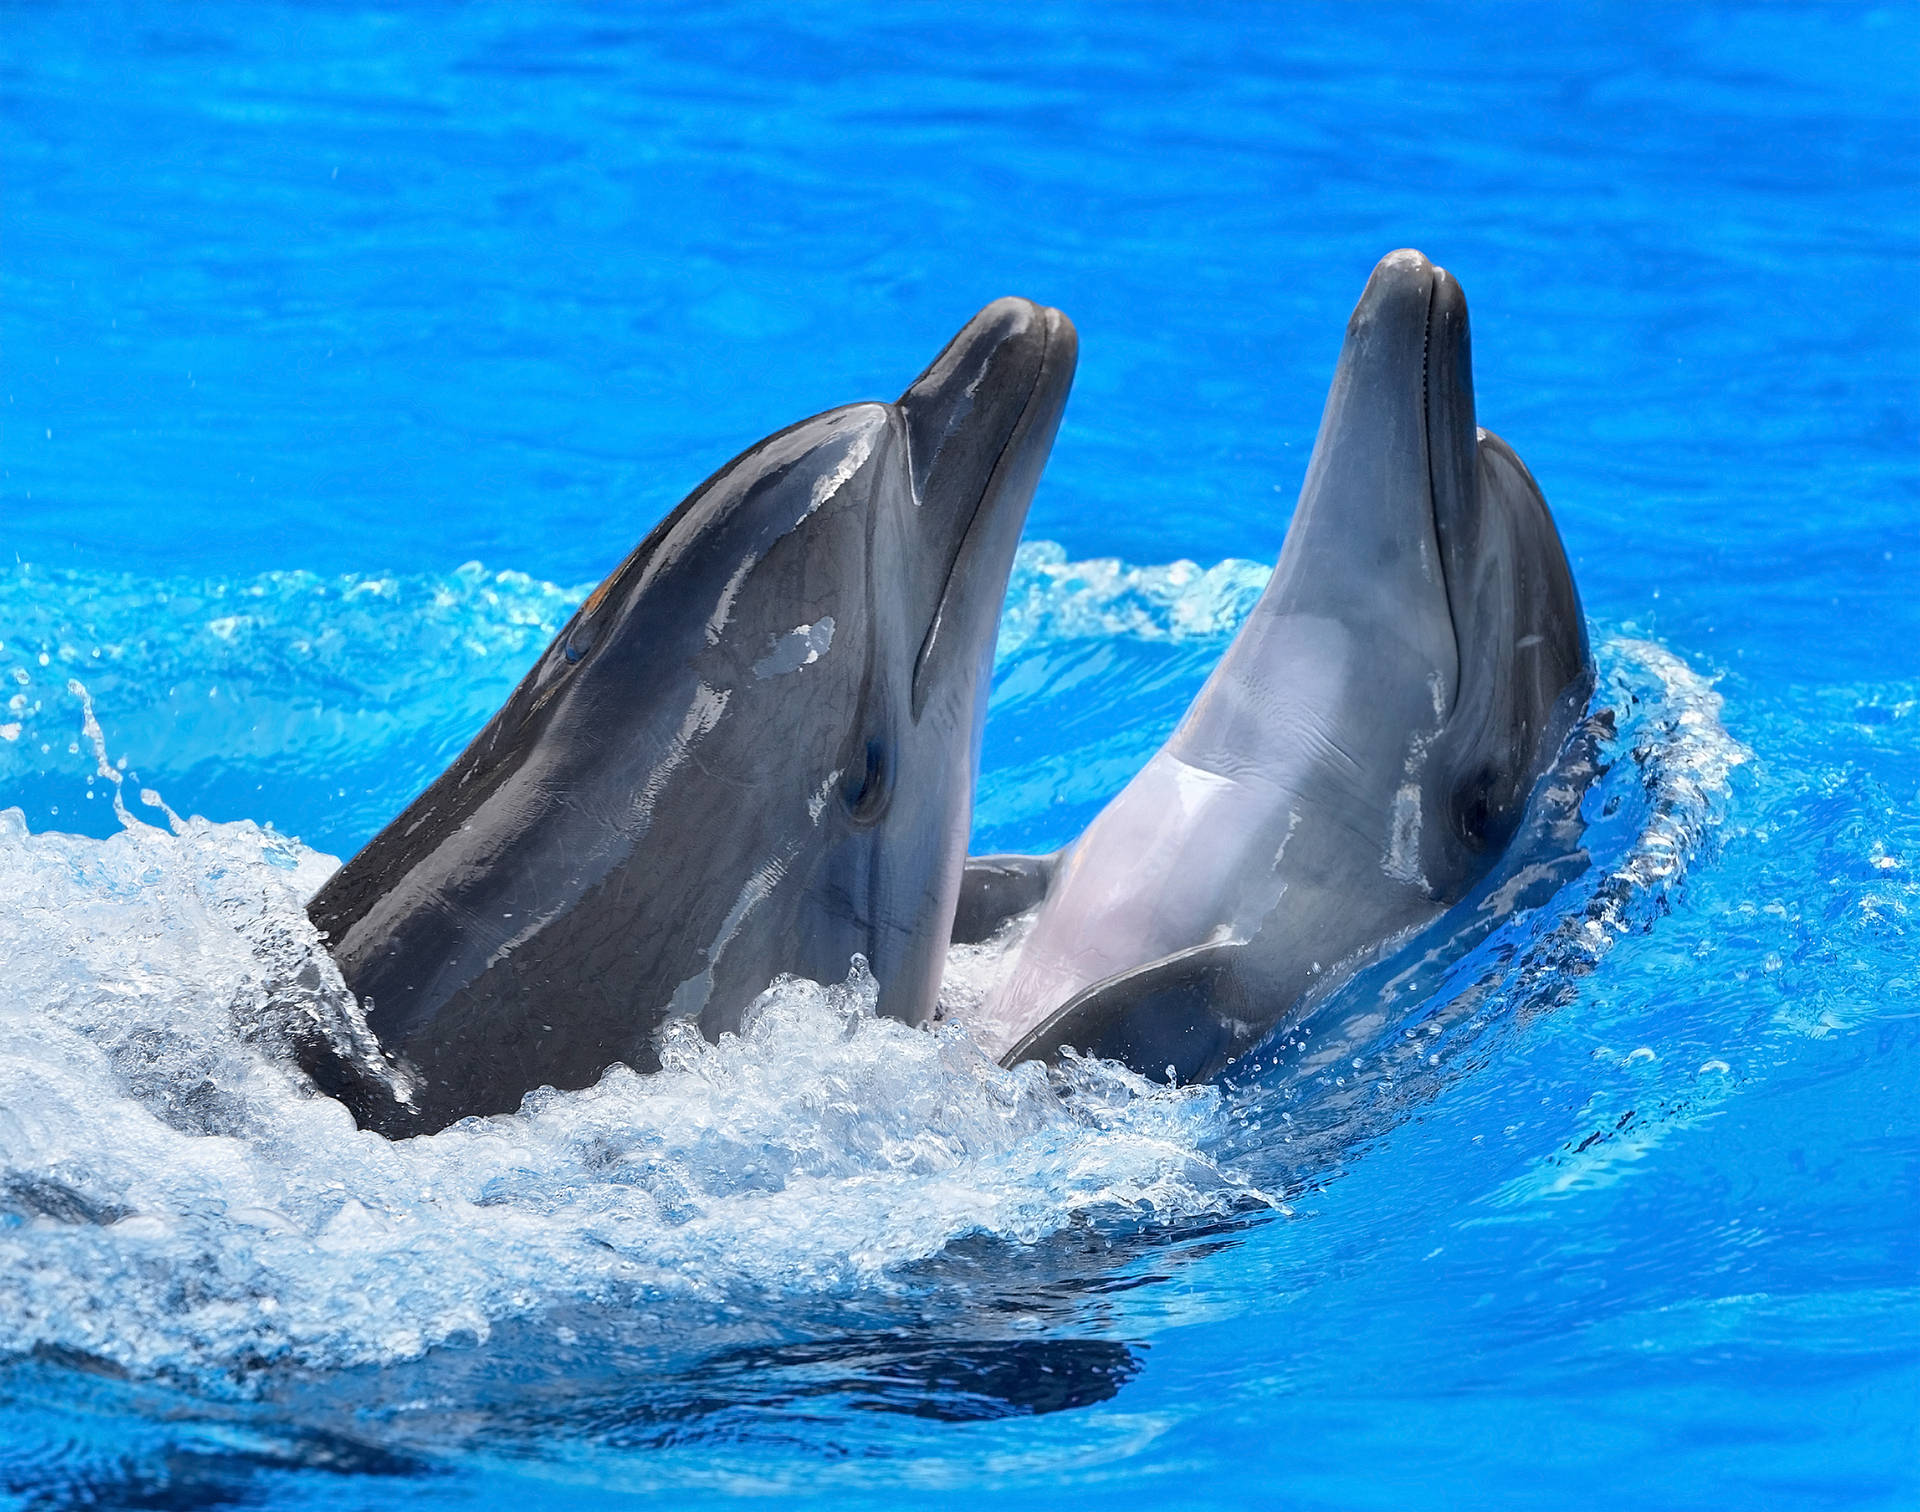 Dolphin 5078X4000 Wallpaper and Background Image